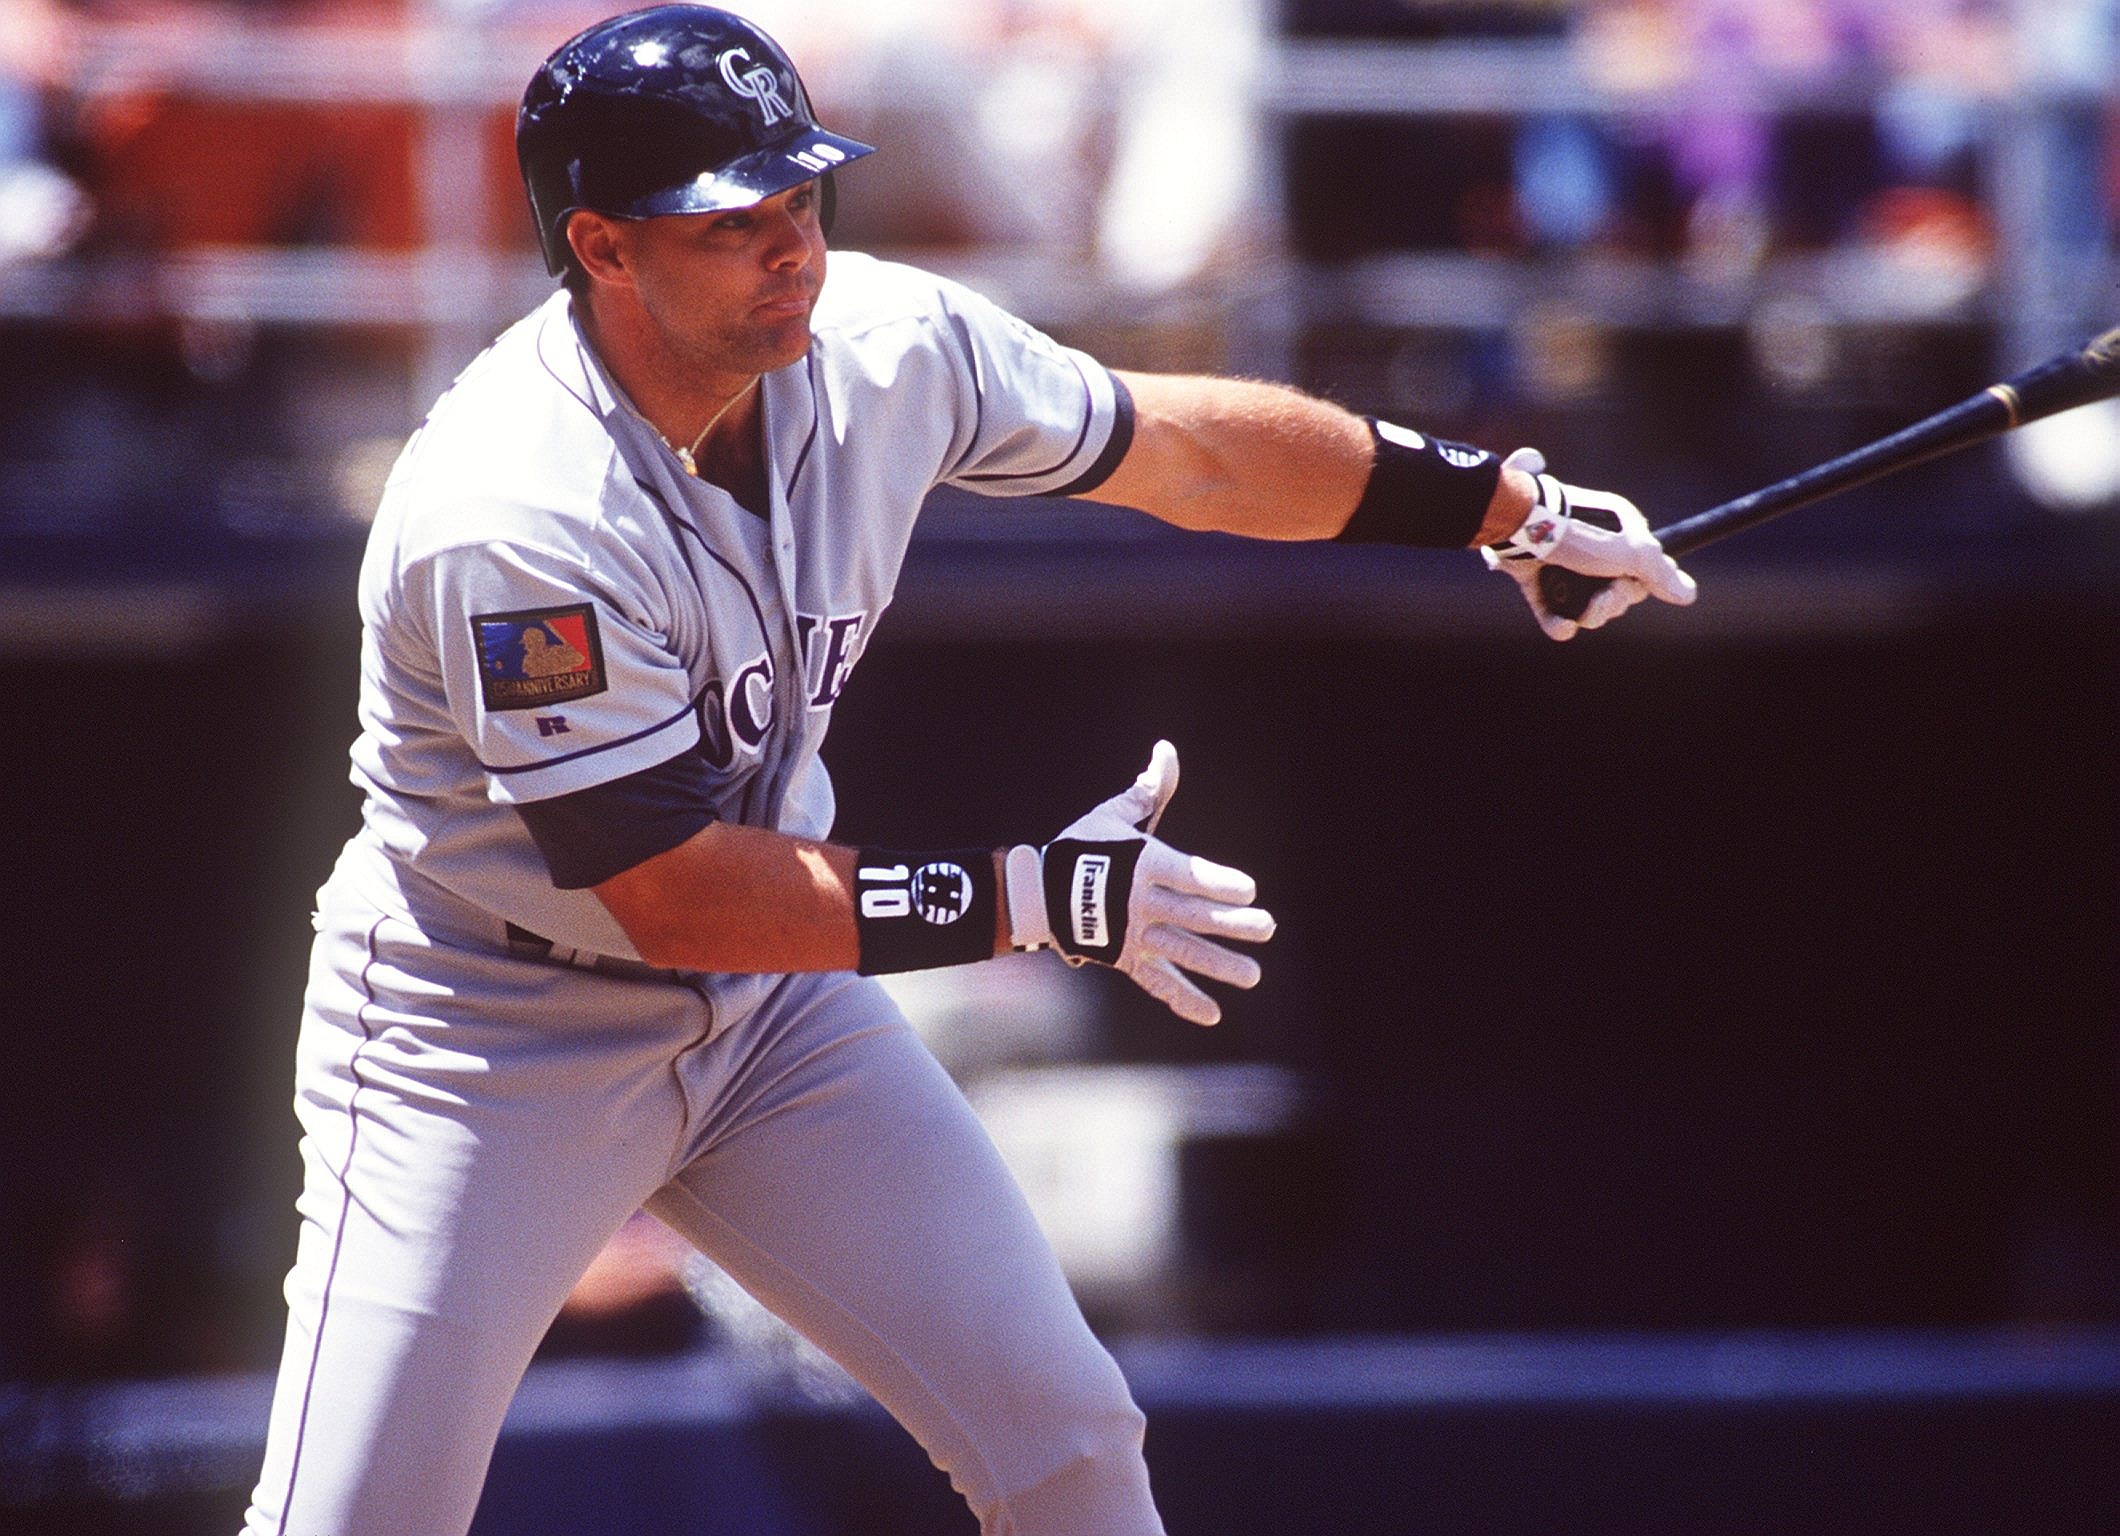 Dante Bichette quit job with Blue Jays for great reason